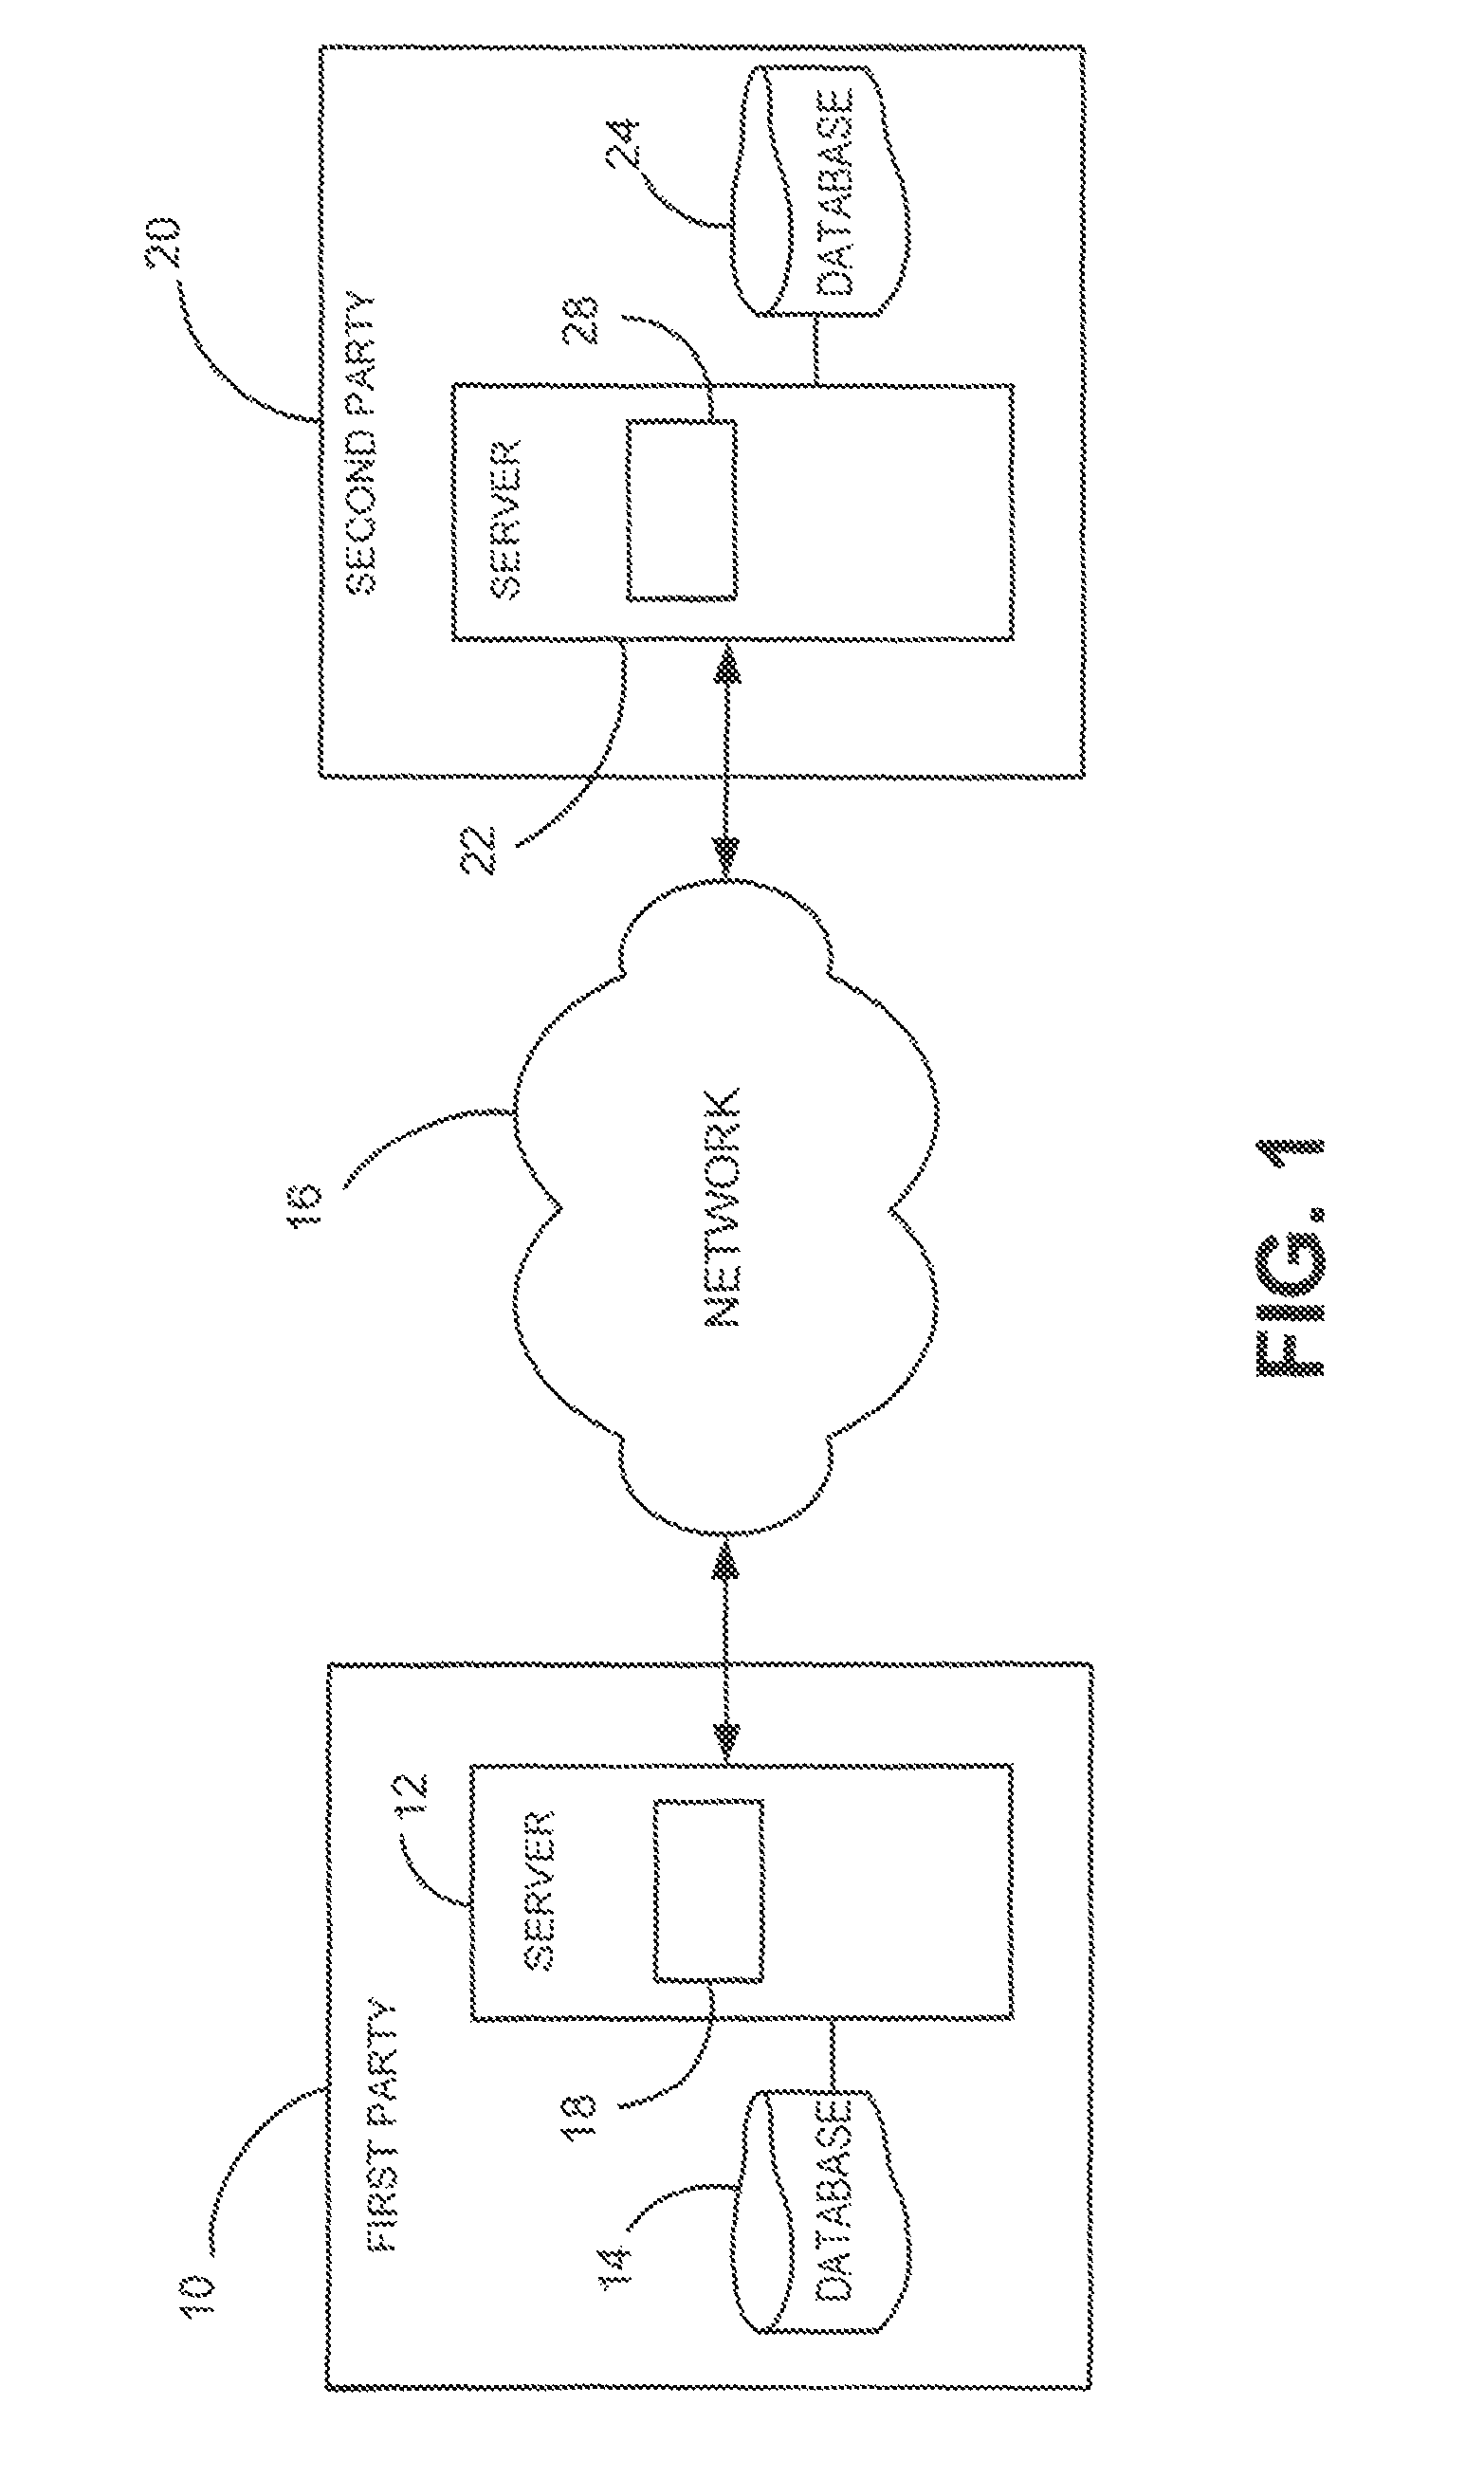 System and method for matching data sets while maintaining privacy of each data set